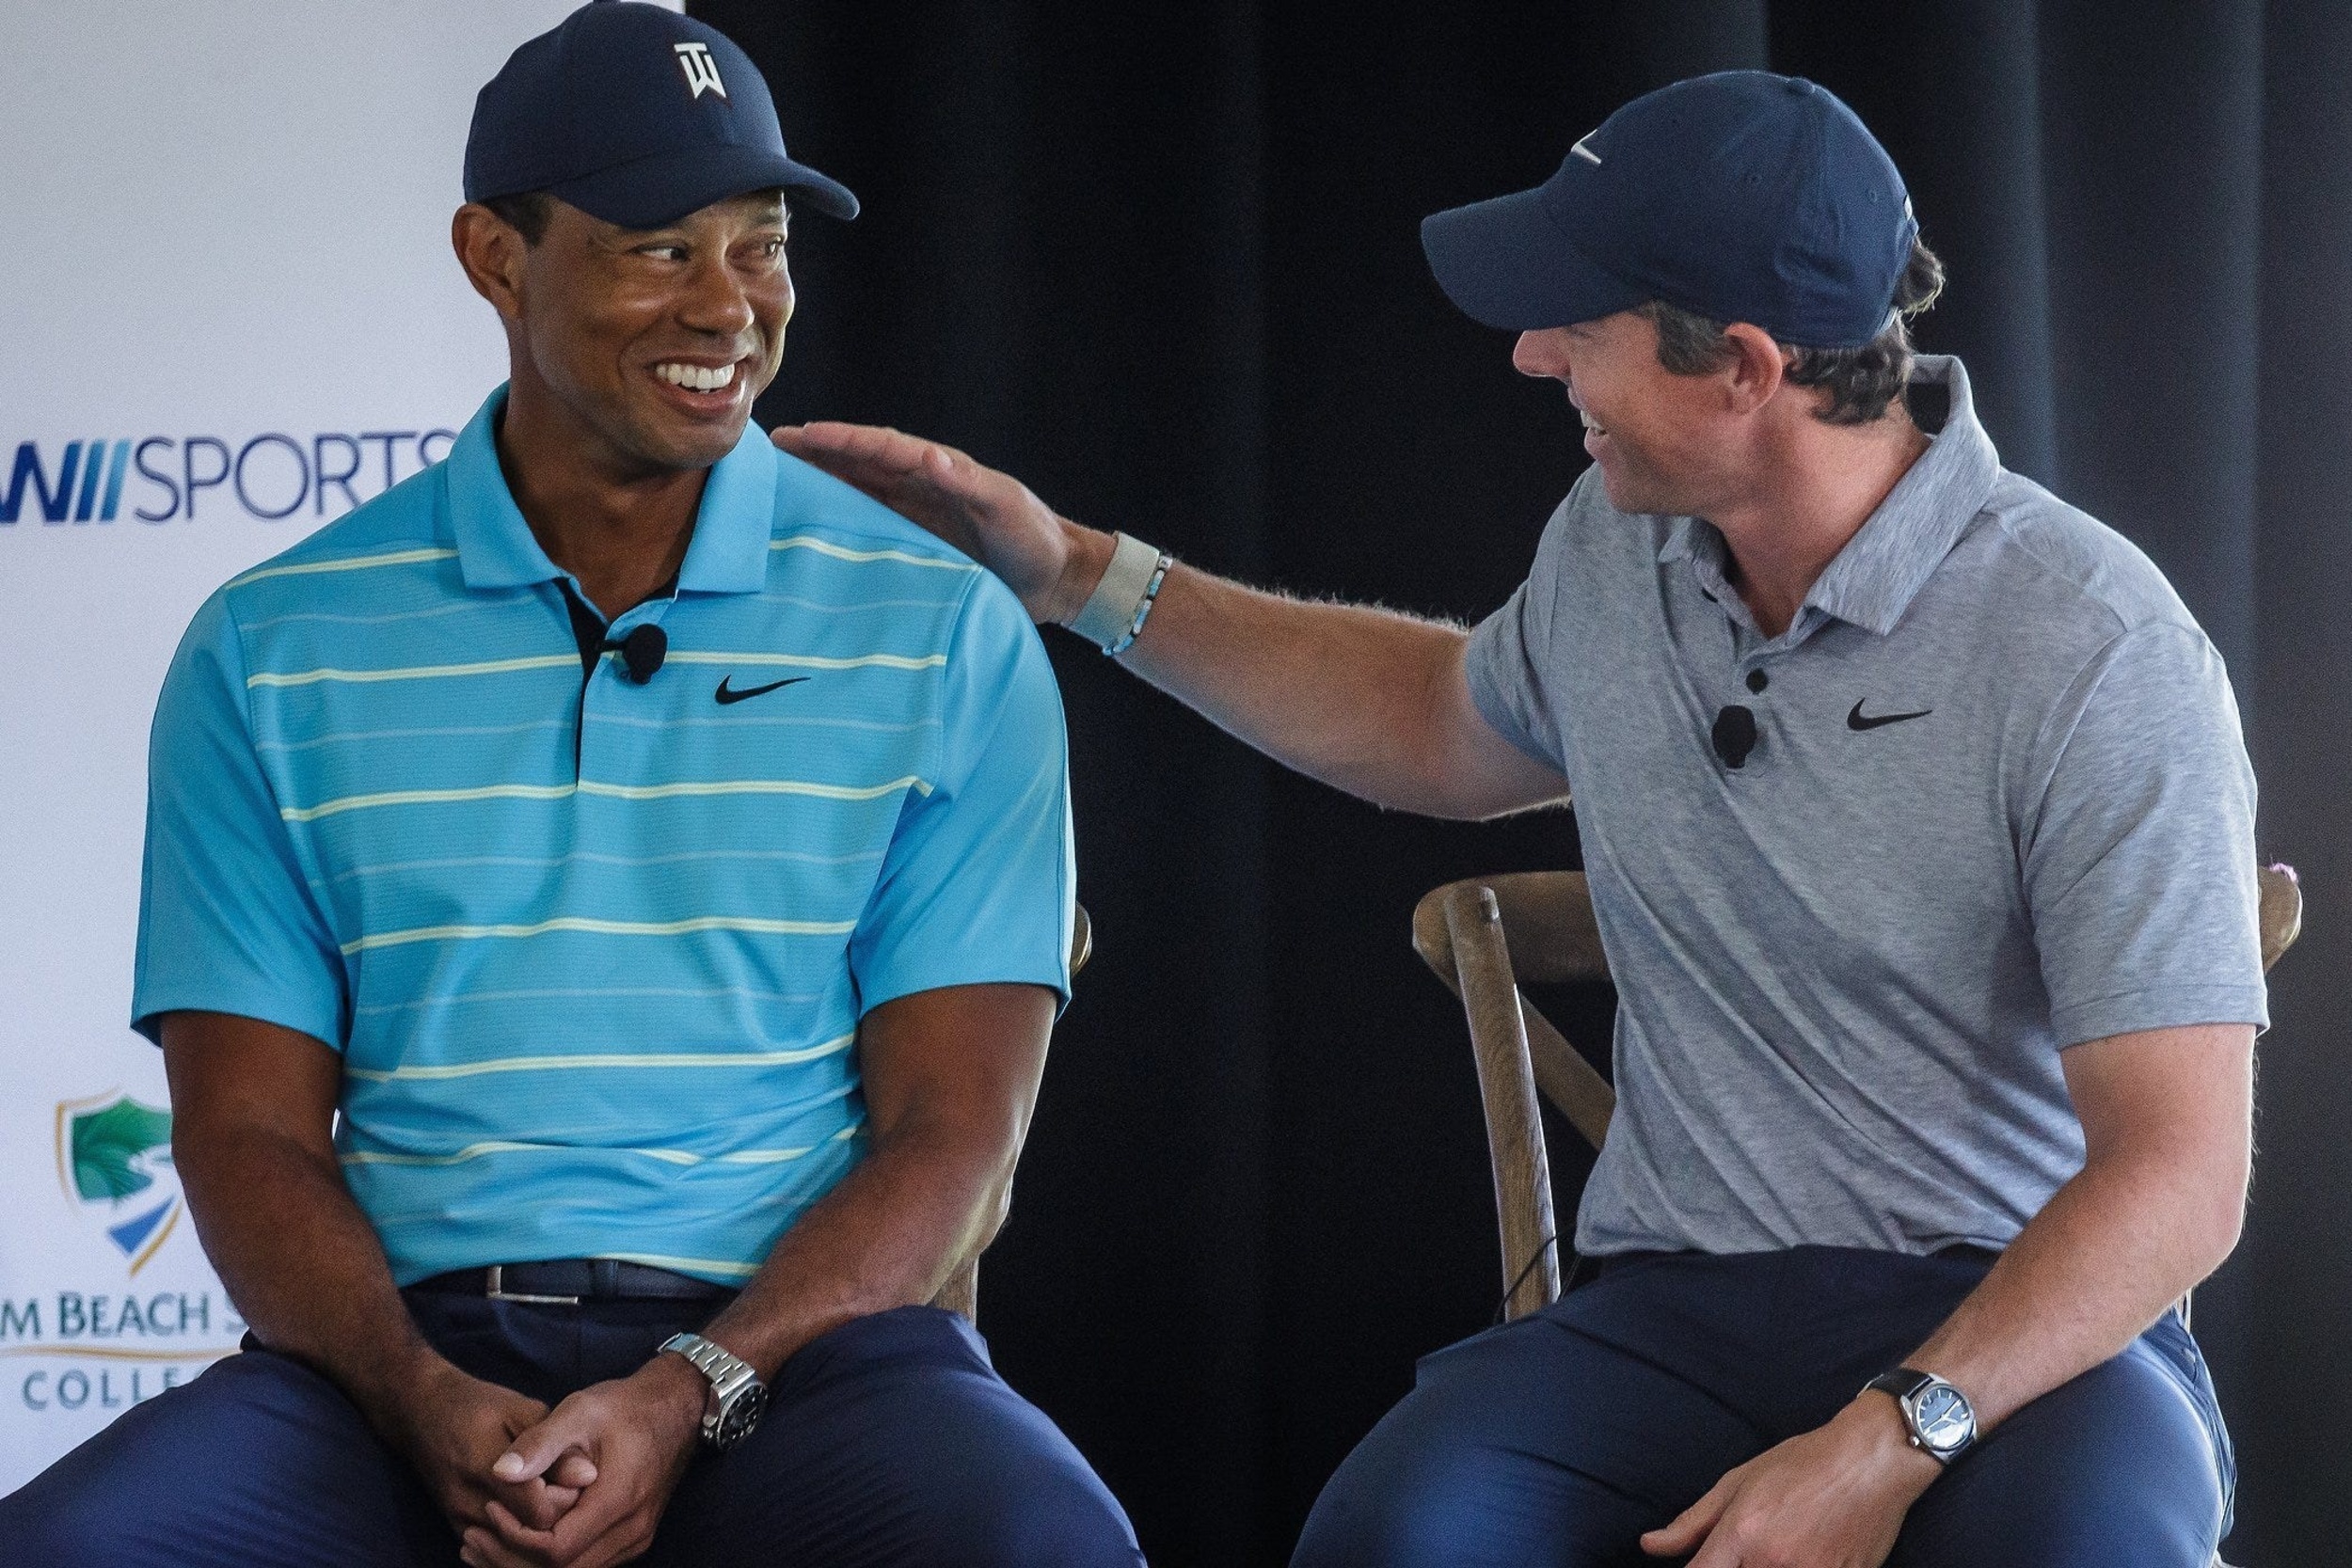 tiger woods, rory mcilroy's 'soured' relationship paints murky future for pga tour